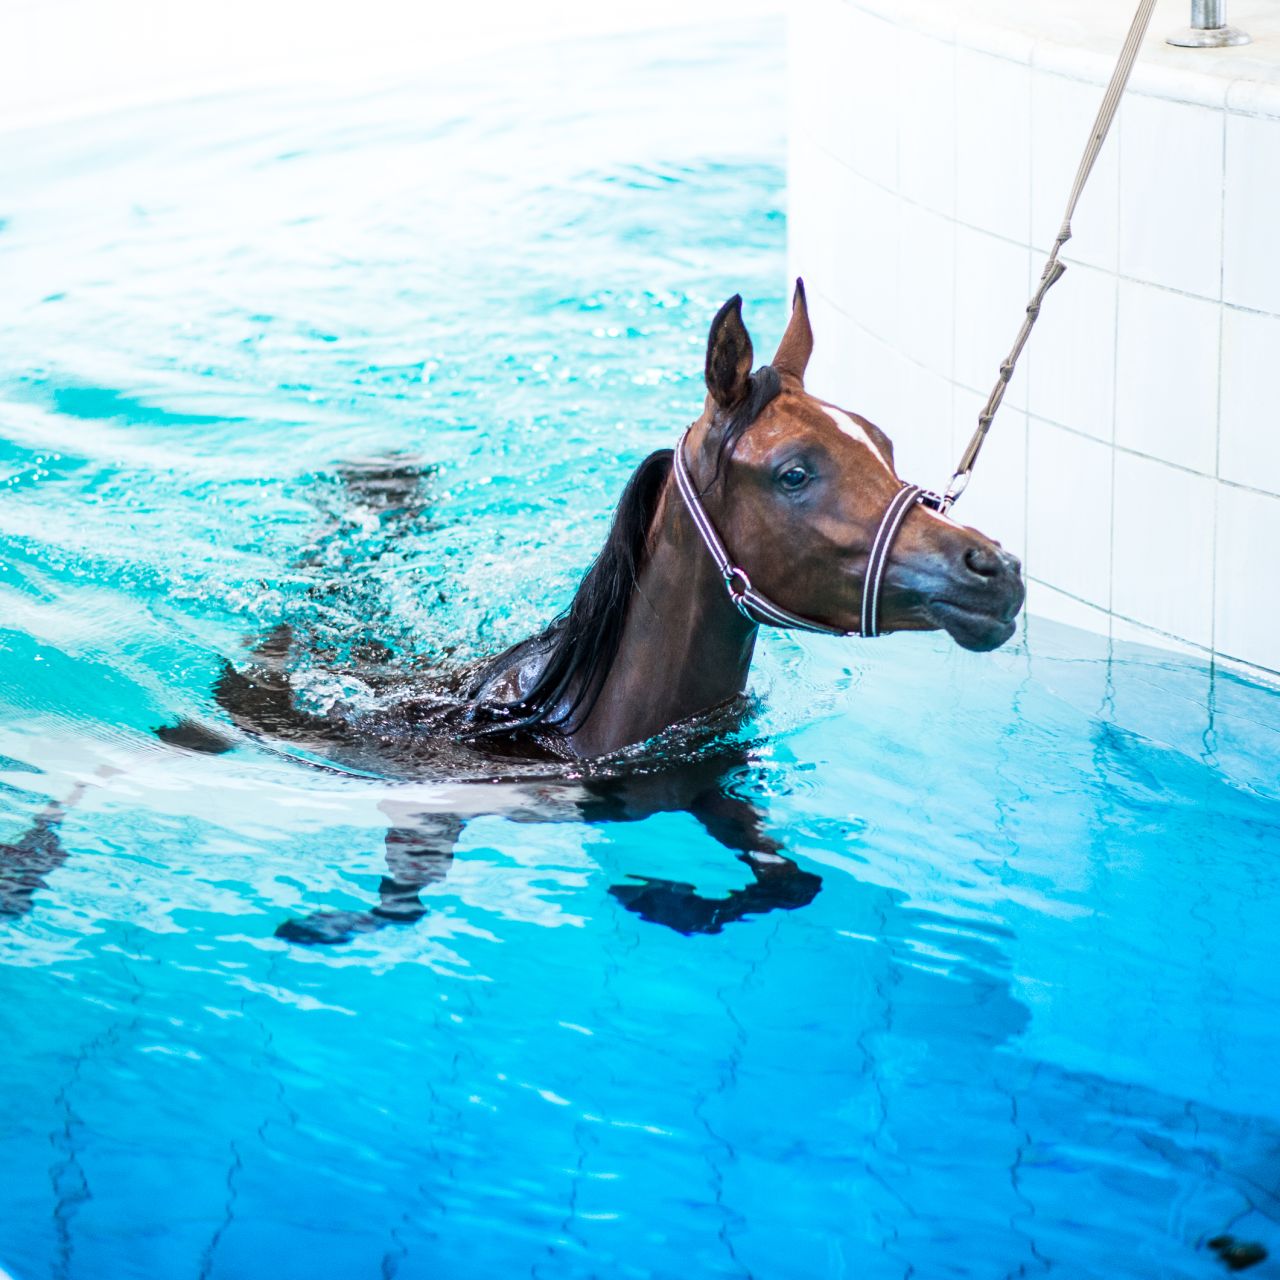 An indoor pool is used to exercise the horses some doing as much as 10 laps of an Olympic-sized swimming pool at a time.